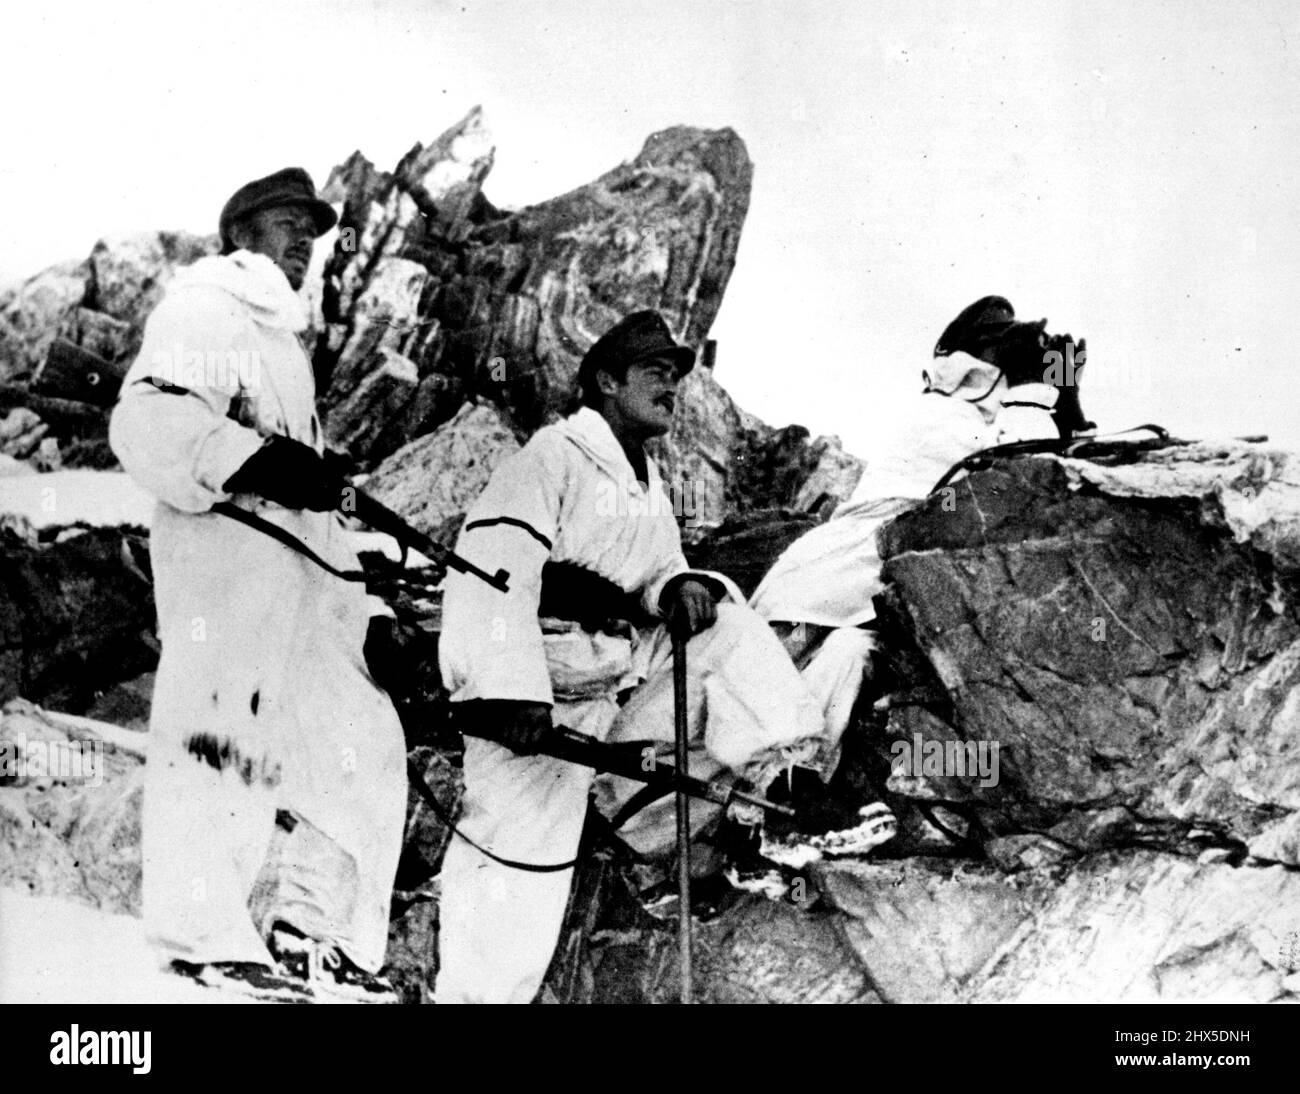 German Alpine troops In Northwest Caucasus - White-clad German Alpine Troops man an observation point in the Northwest Caucasus, says the German caption accompanying this photo which reached London from a neutral source. Their assignment is reconnaissance, not battle. January 7, 1943. (Photo by Associated Press Photo). Stock Photo